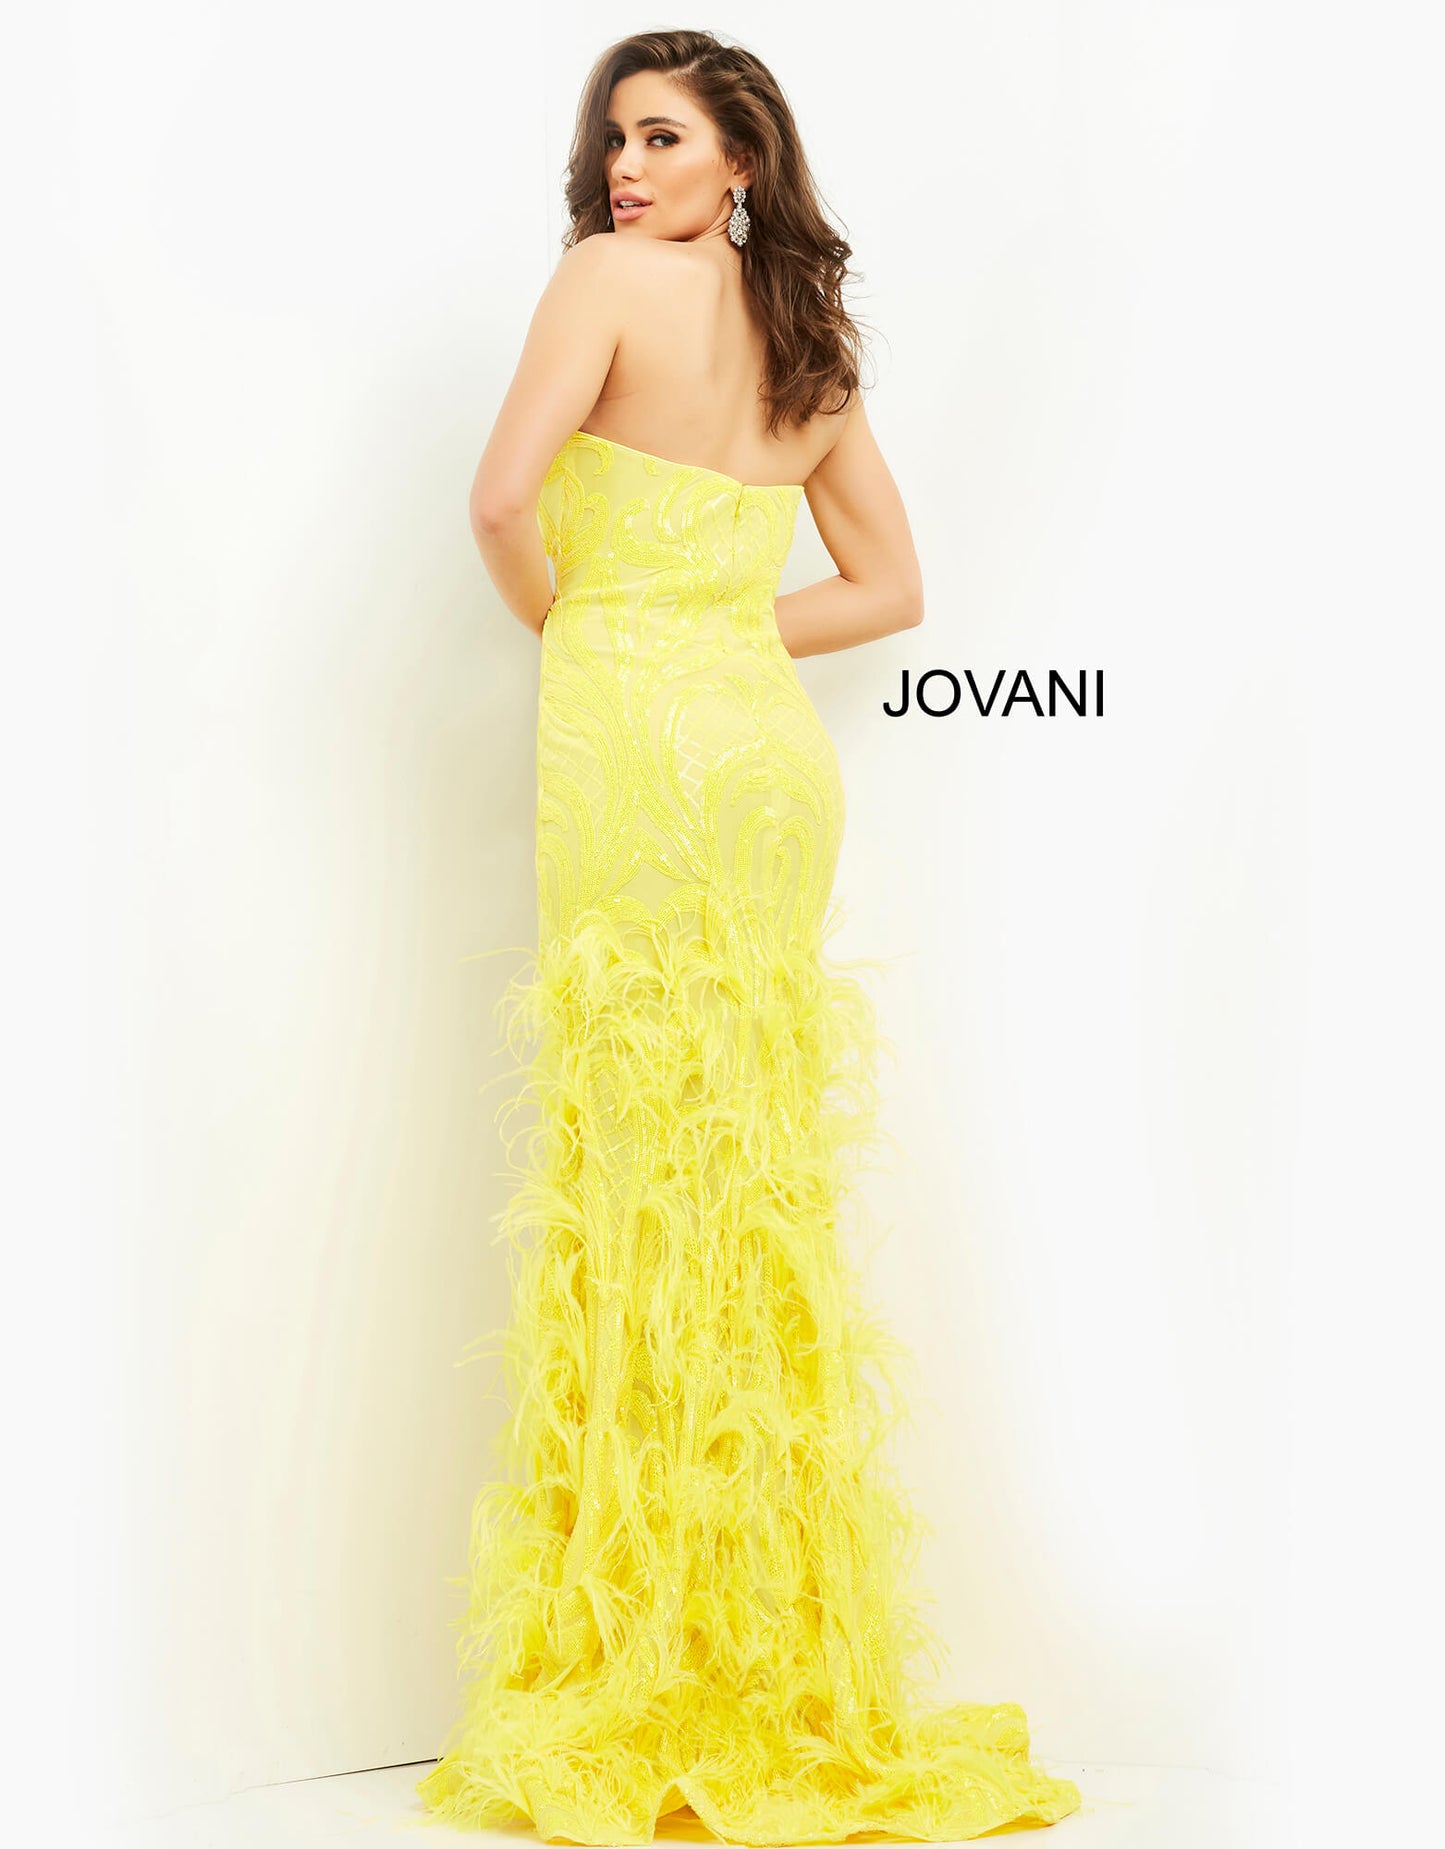 Jovani 05667 This is a long prom dress with feather details on the bottom of the skirt.  This pageant gown has a sweetheart neckline and is strapless.  Perfect evening gown for a Red Carpet event.  Colors:  Yellow, White  Sizes  00-24